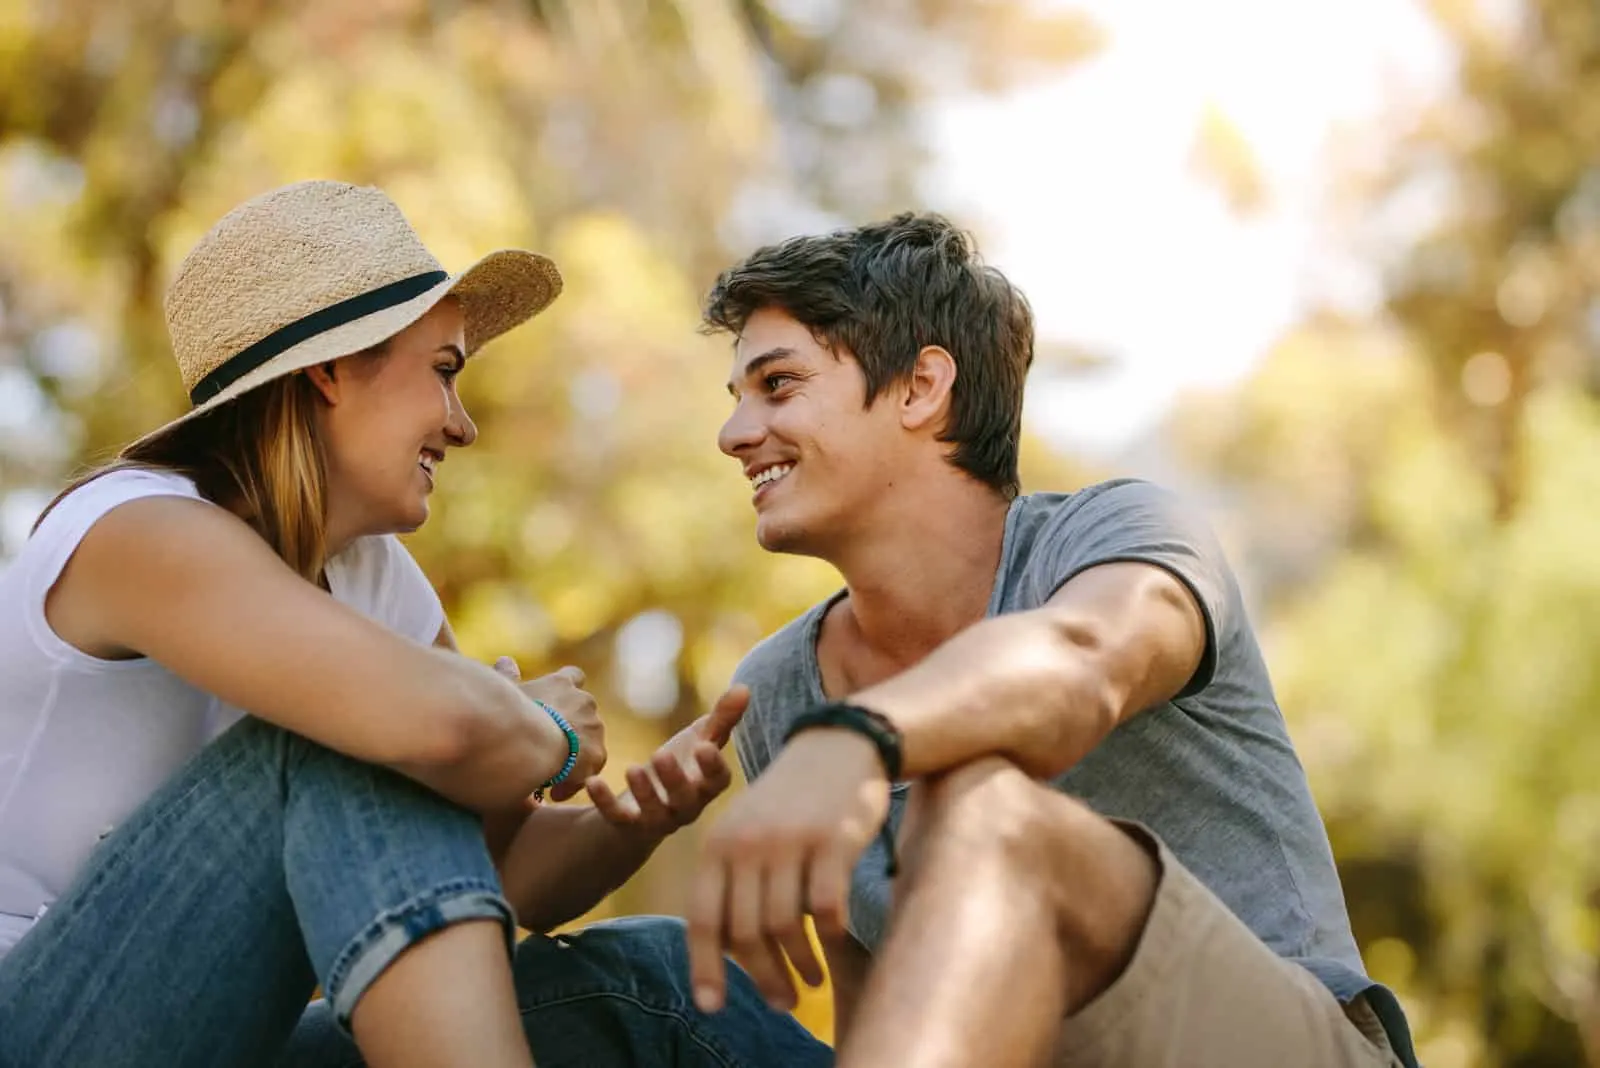 a smiling man and woman sit on the grass and talk